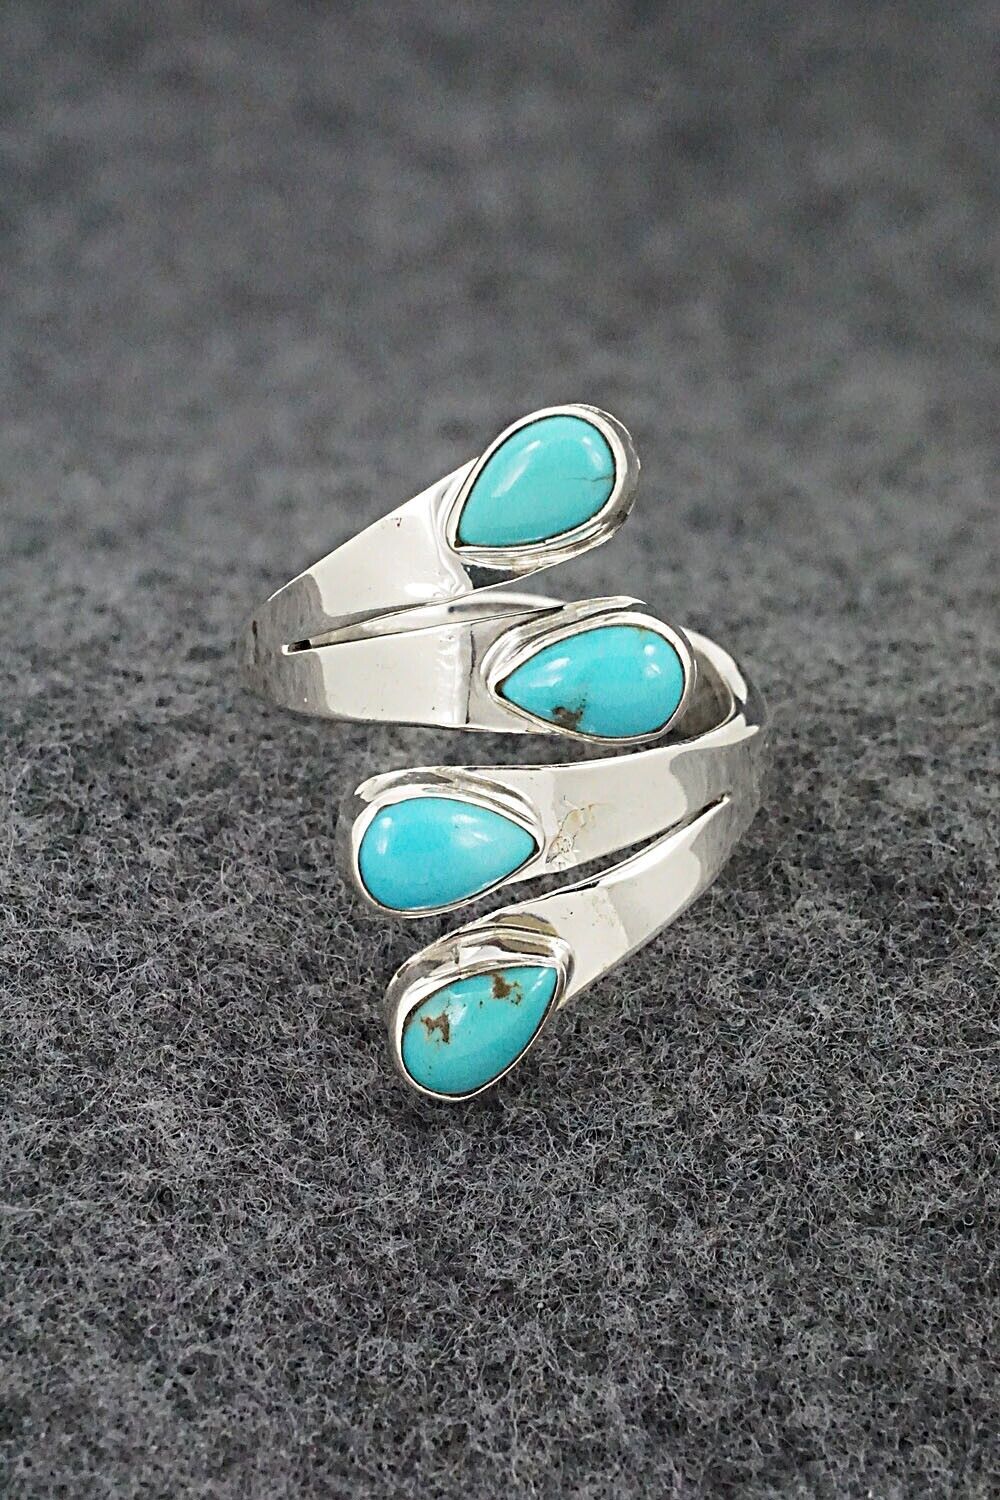 Turquoise & Sterling Silver Ring - Thomas Yazzie - Size 9.5